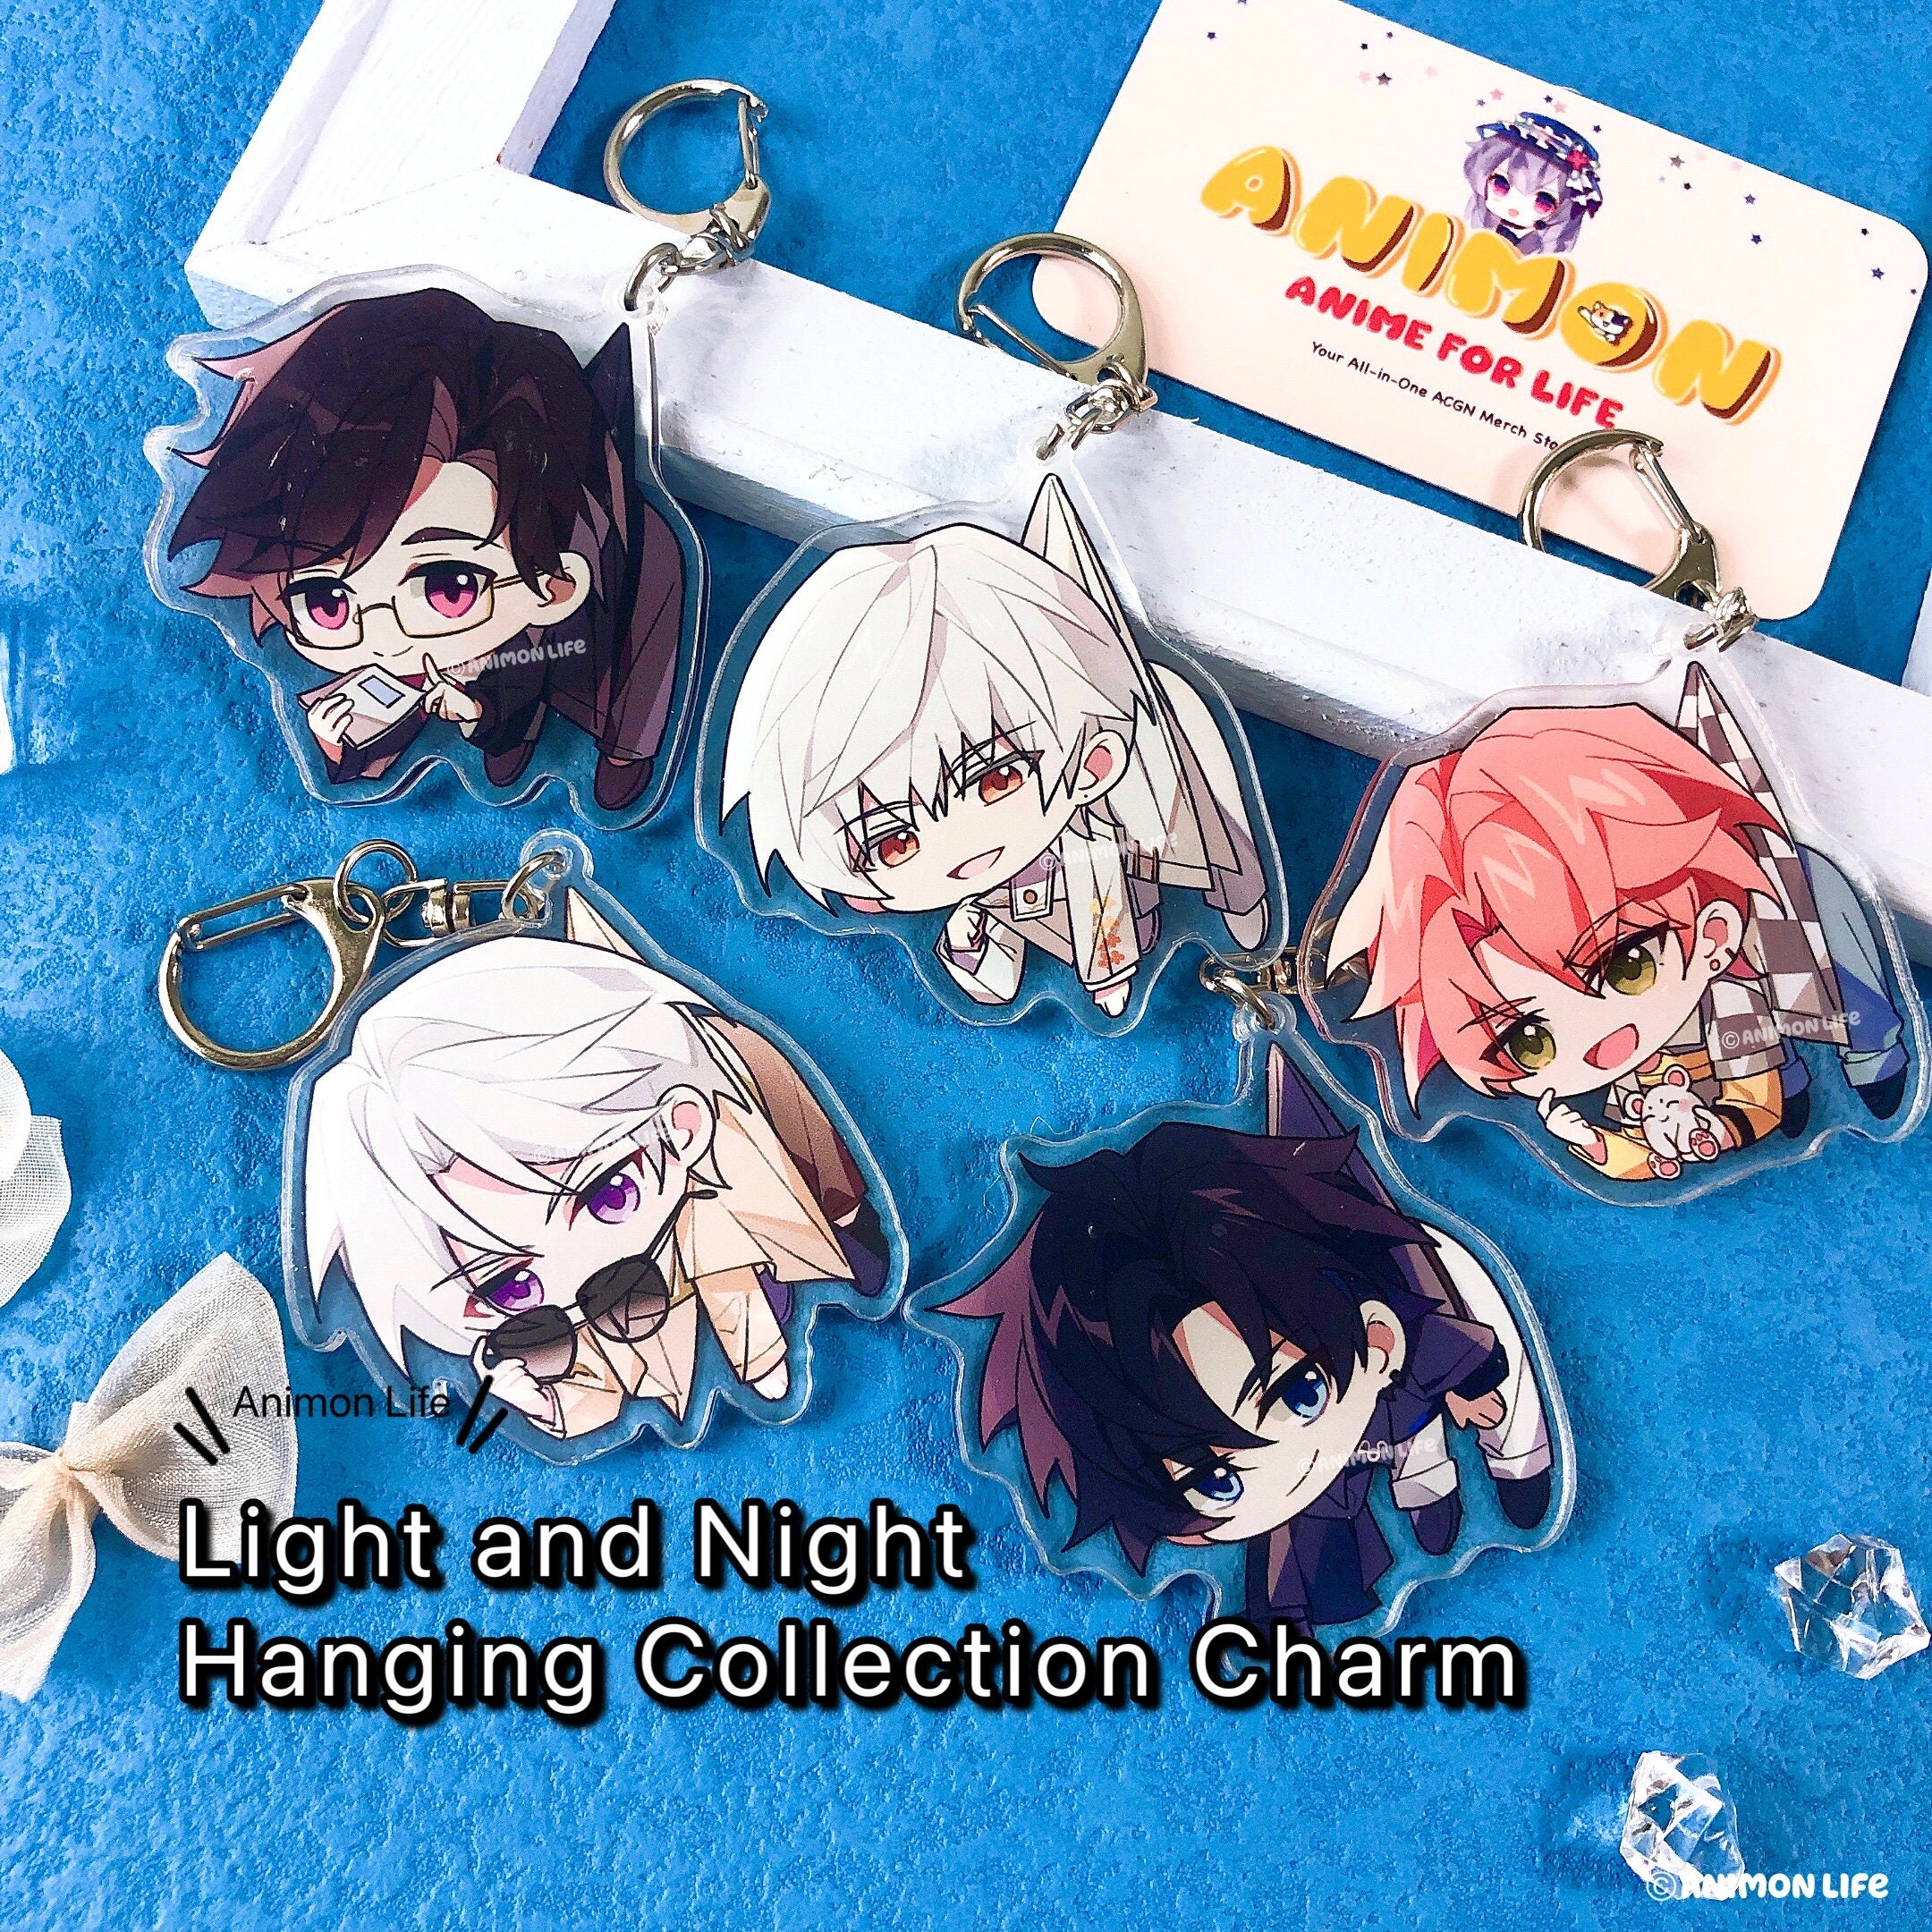 Buy Call Of The Night - Different Characters Themed Cool Acrylic Keychains  (10 Designs) - Keychains